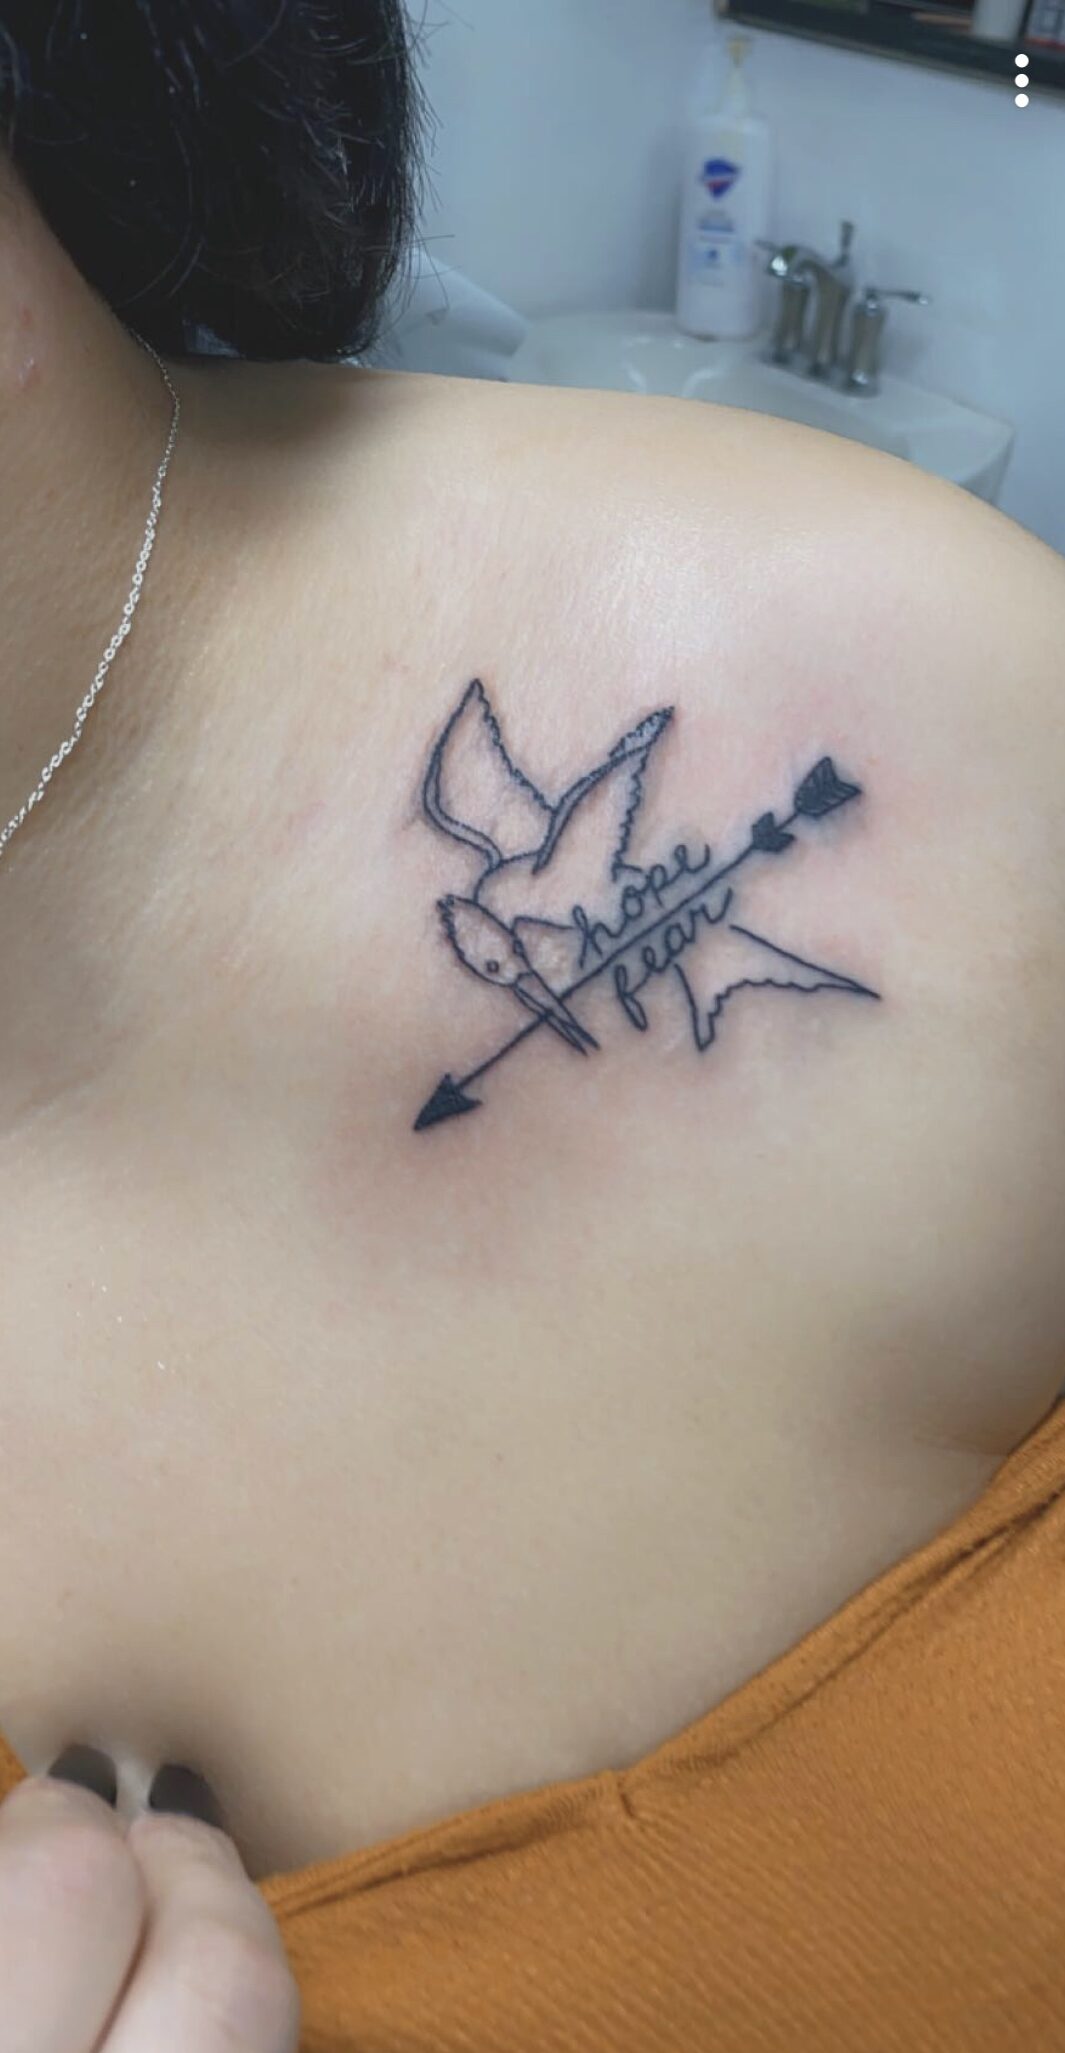 Can You Get a Tattoo If You Have Eczema?